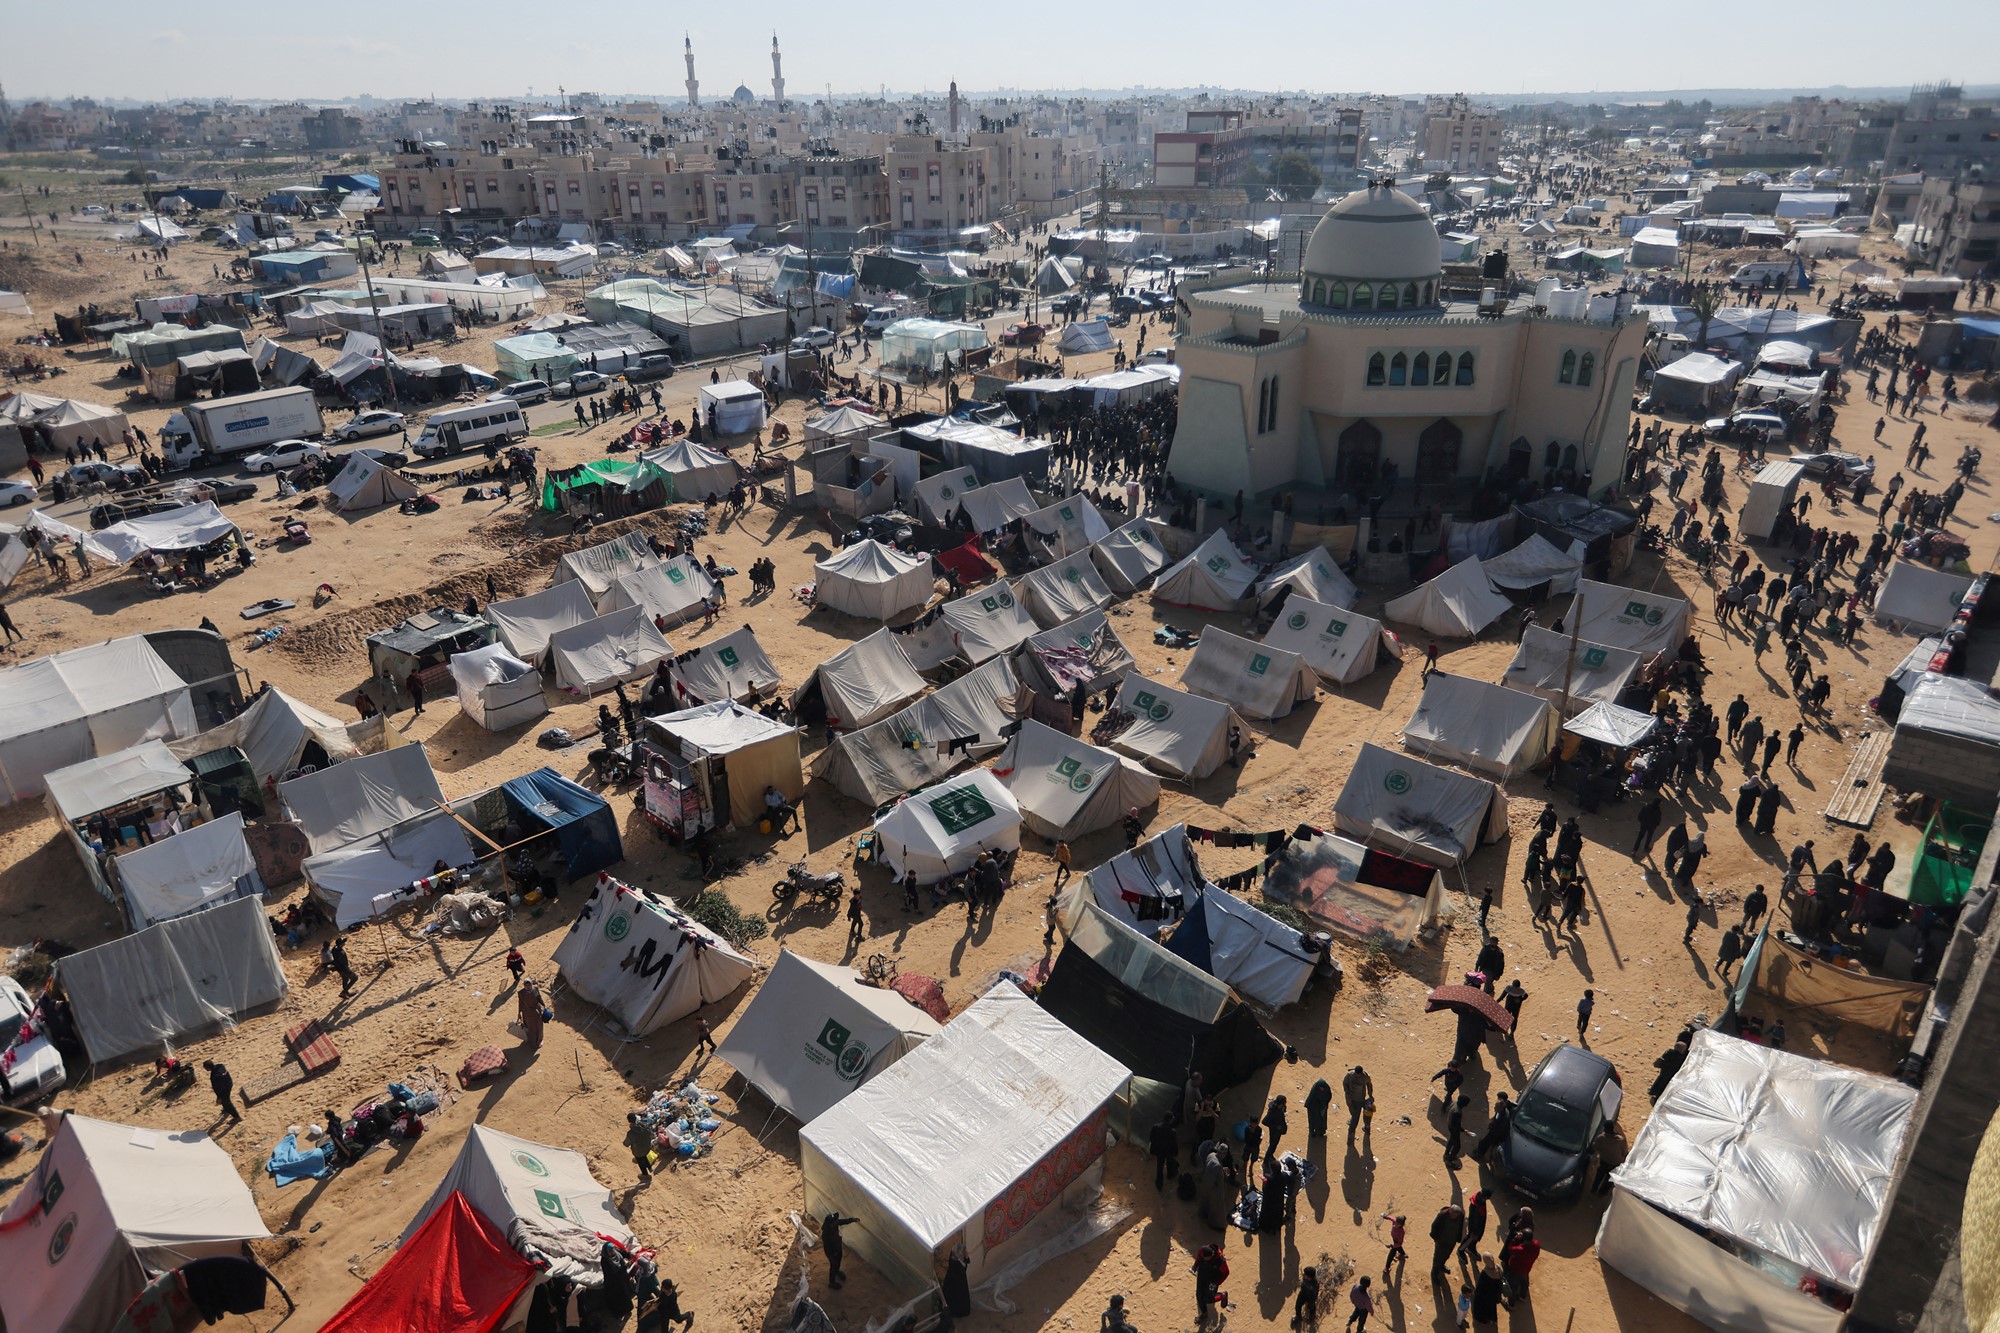 Aerial view of a refugee camp with a mosque in the top right.